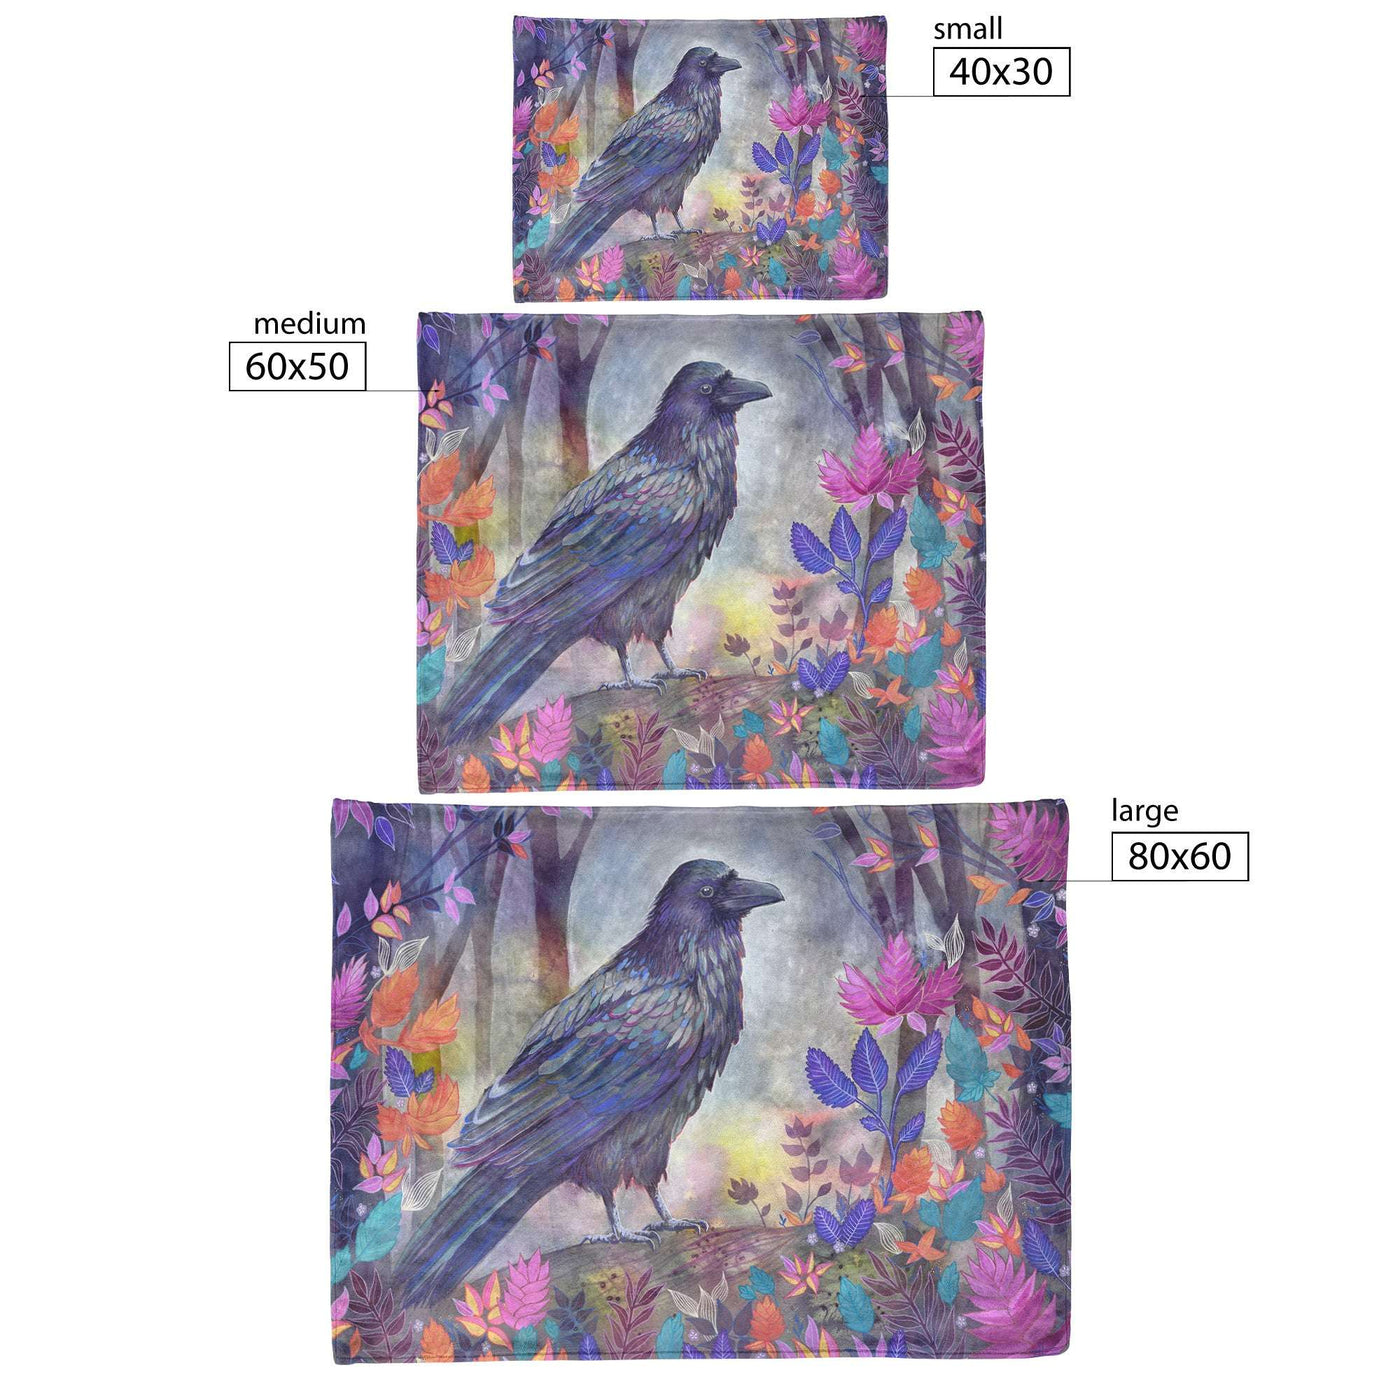 Various fleece blankets depicting a vividly colored black raven among colorful leaves, available in three sizes.